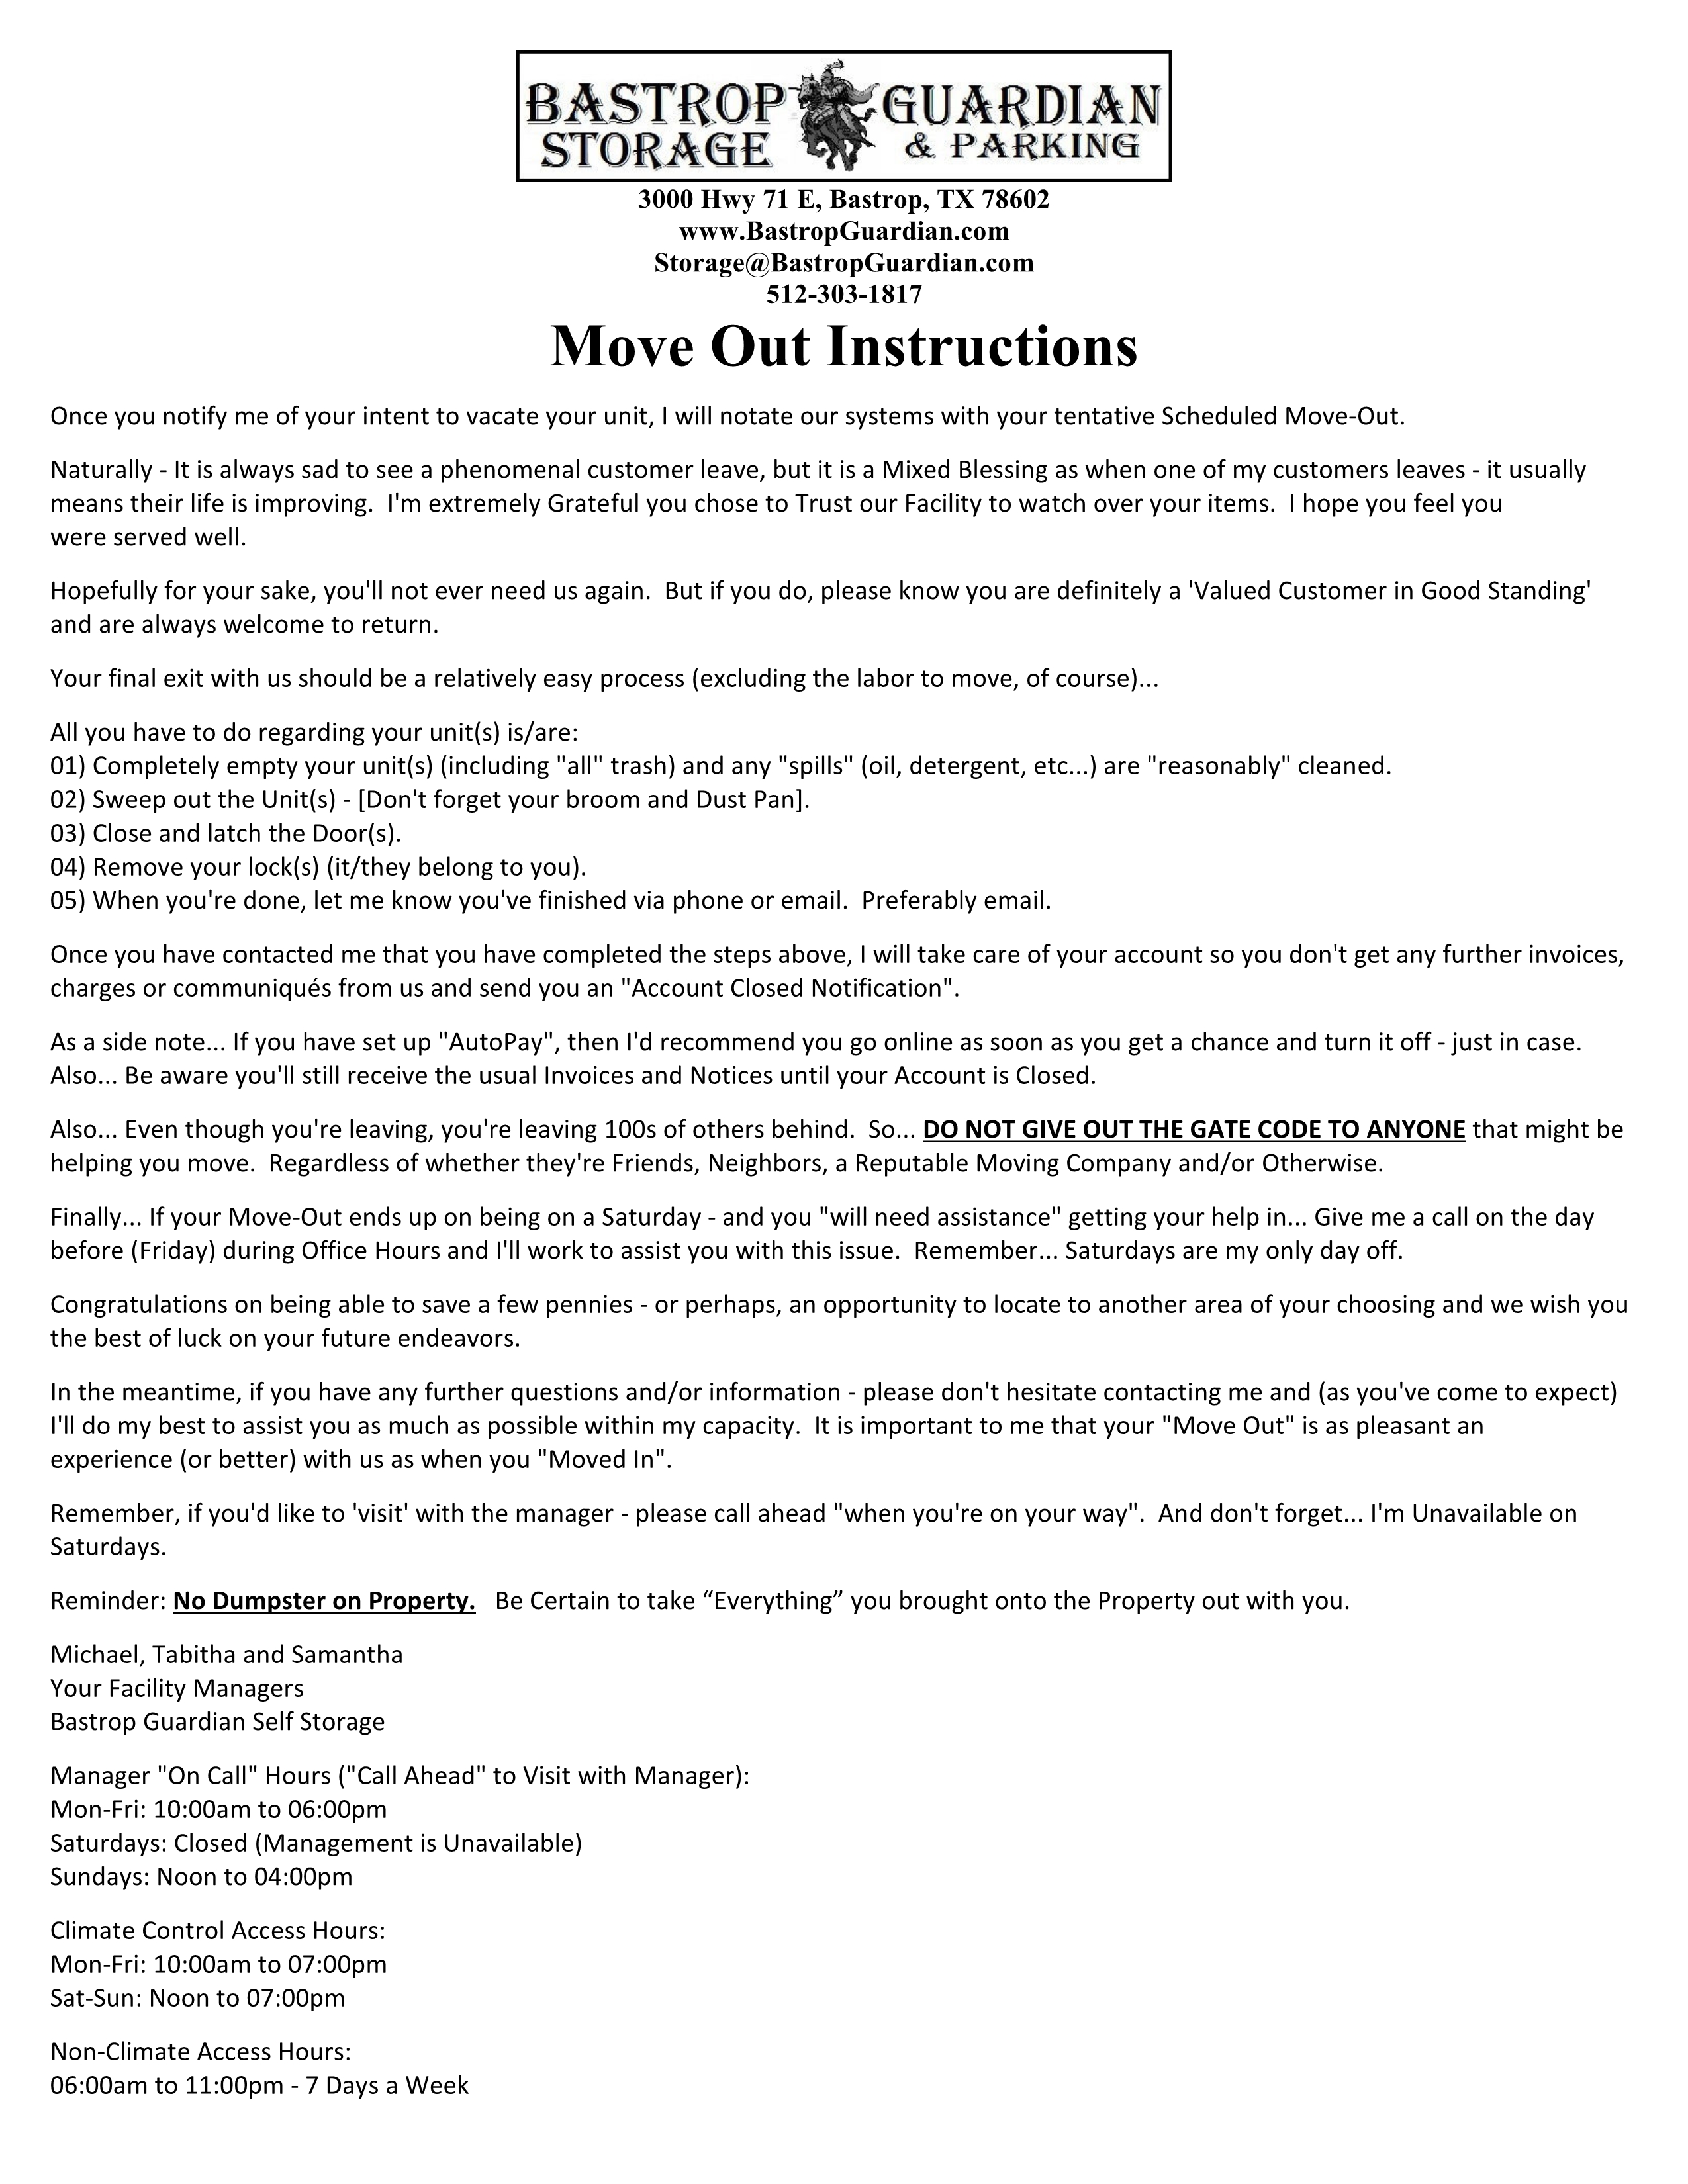 Download and Print Our Bastrop Guardian Storage Move Out Instructions